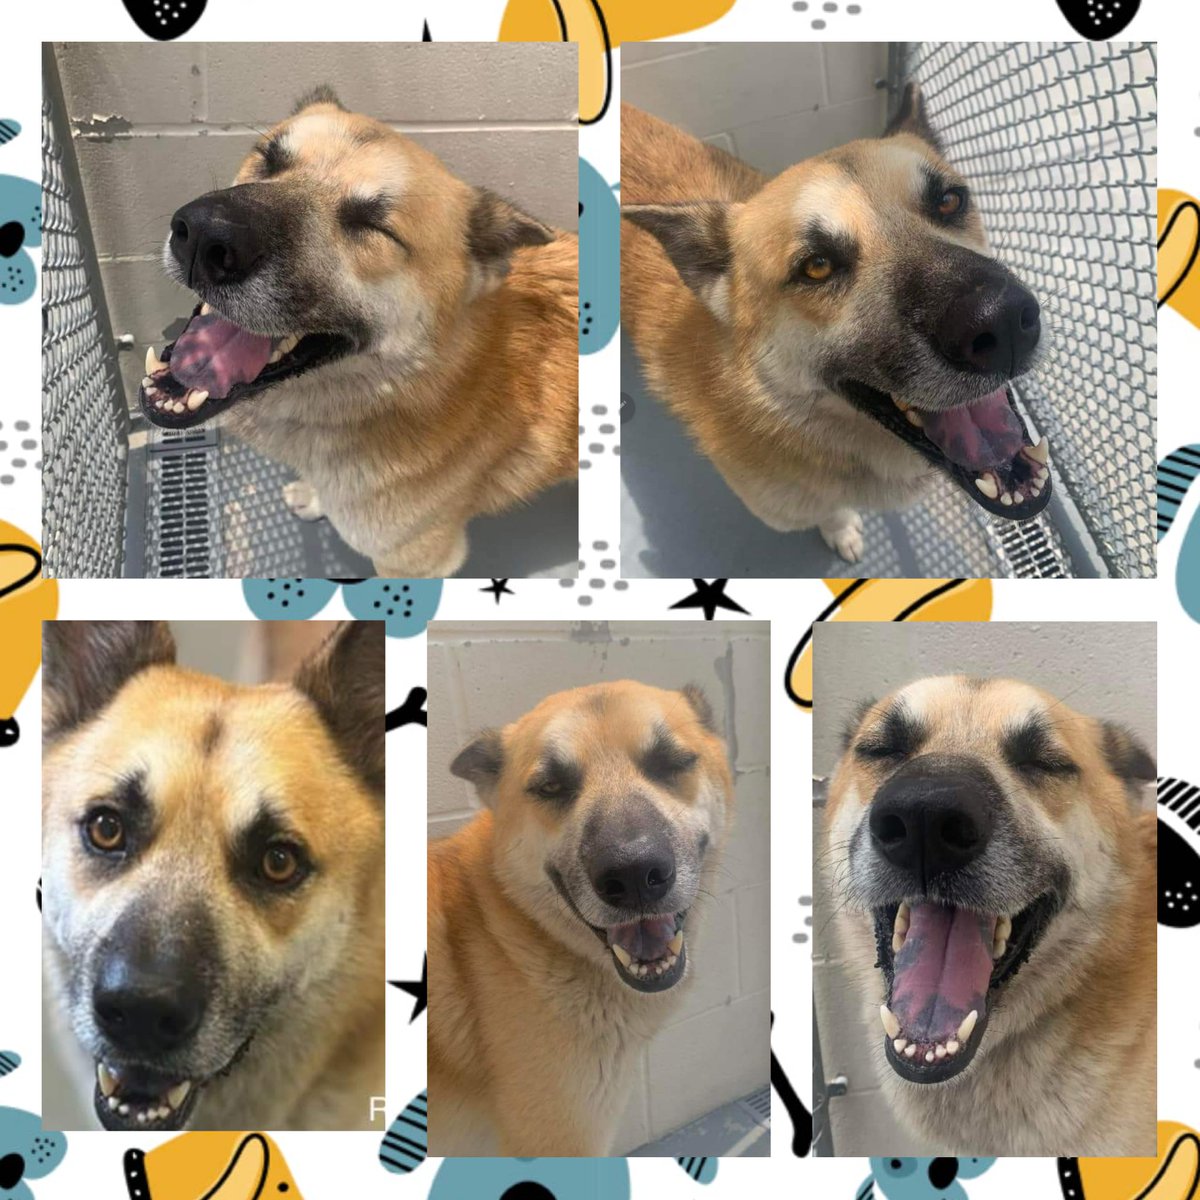 🆘️amazing RAMBO #A366729 likes people,  takes 🍖gently,  has not been dog tested 😡
Why sentence 💉☠️stray #TBK w/o full eval? 
#CorpusChristi #TX hates strays😭😡
ACS 💉☠️ Rambo if not tagged 4/29, day b4 #NationalAdoptAShelterDogDay event on 4/30
Plz RT,  #PledgeForRescue…